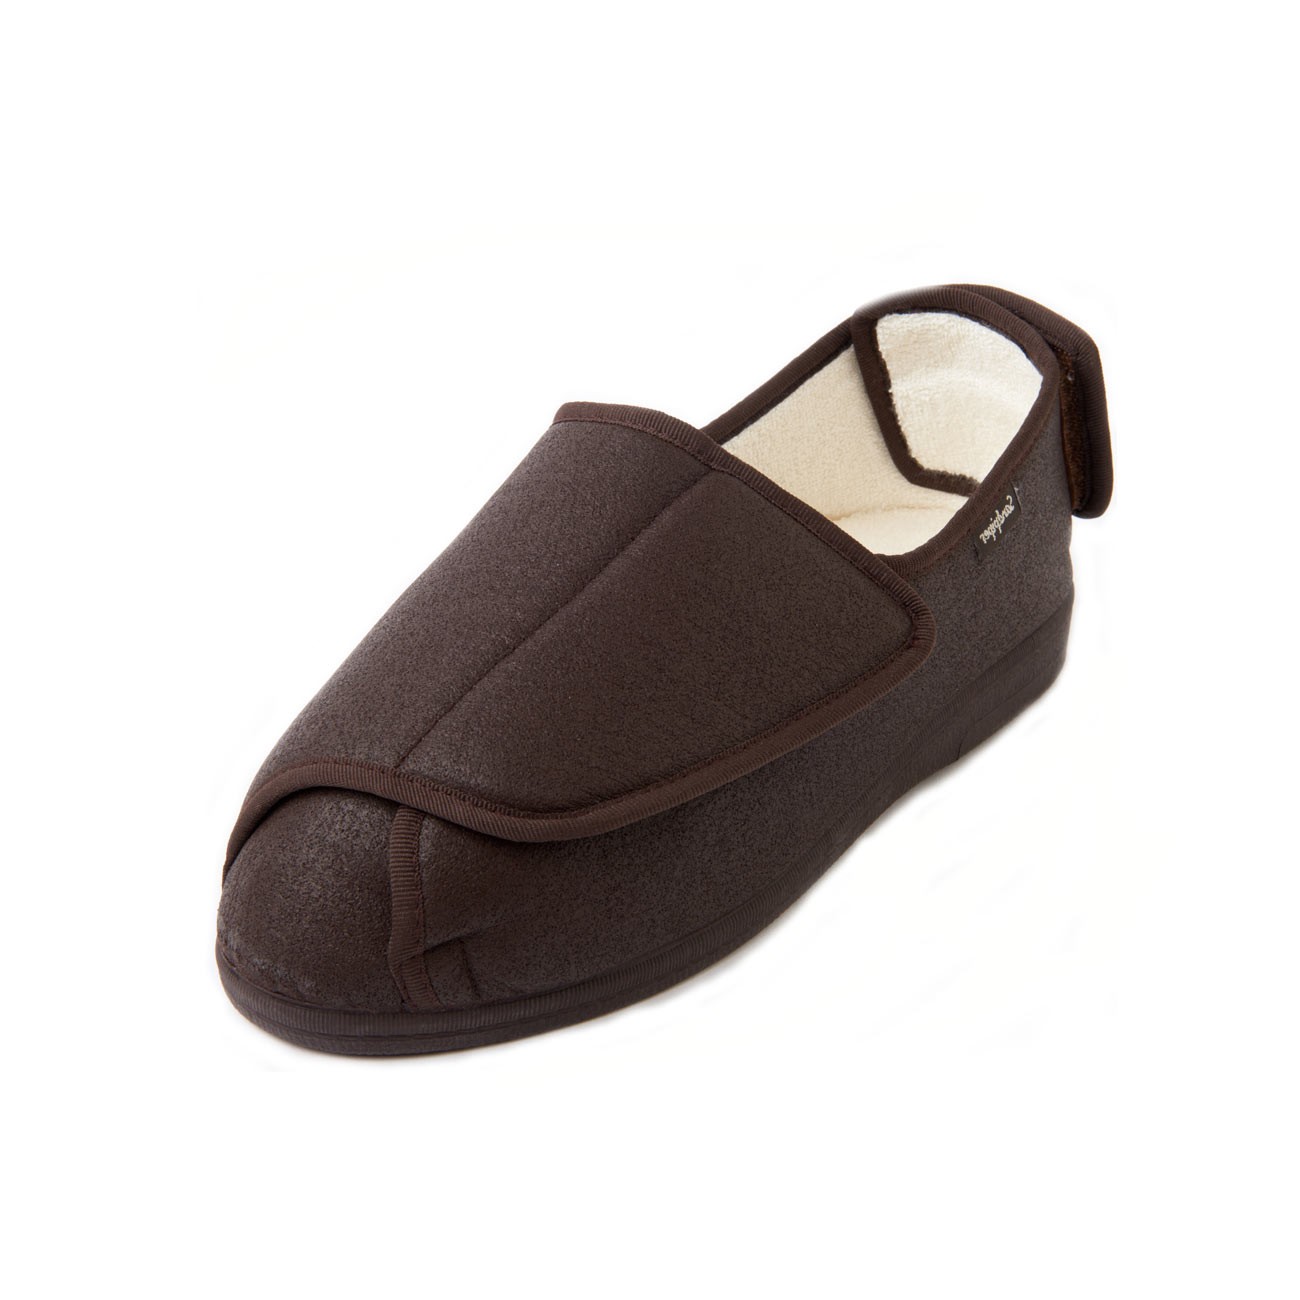 Wesley Extra Wide Men's Slipper and men's wide fitting slippers